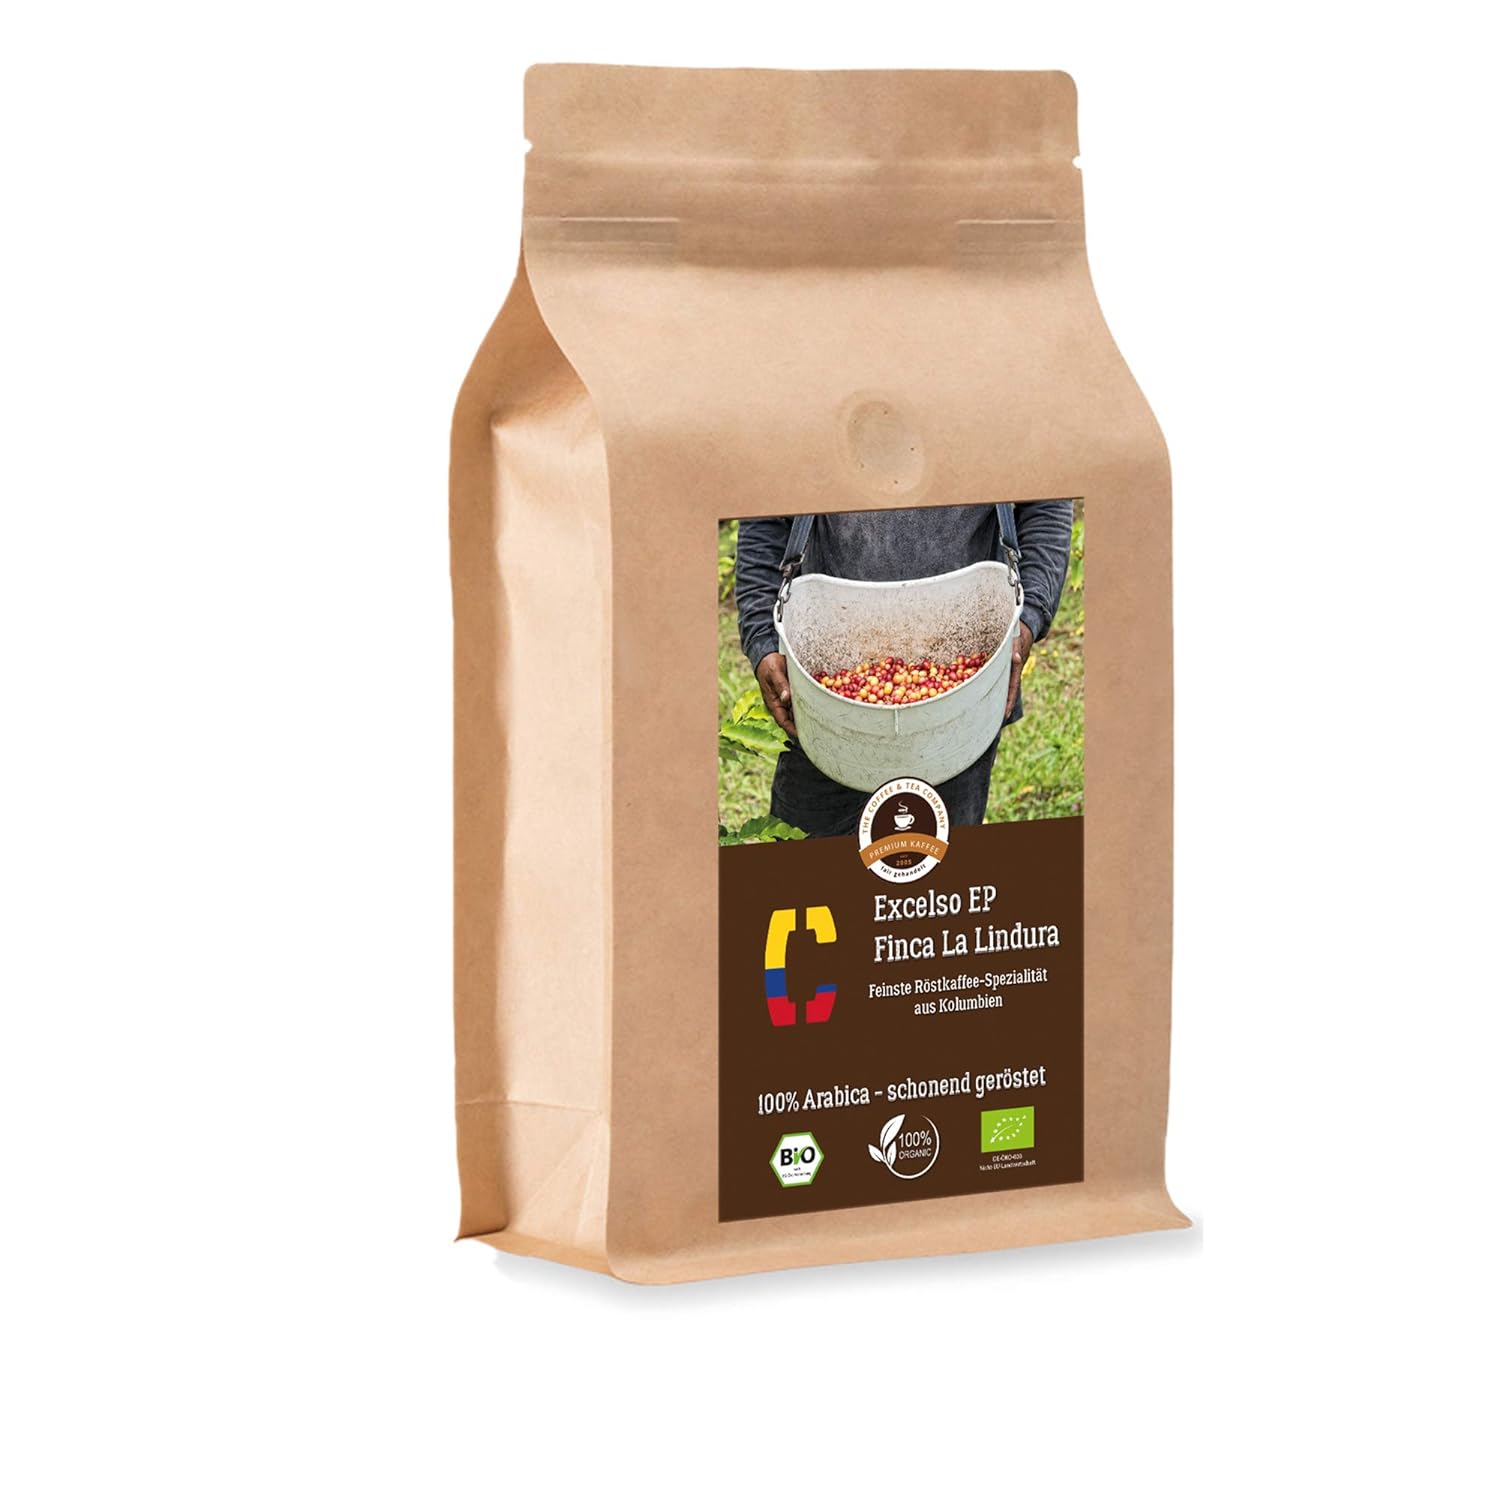 Coffee Globetrotter - Colombia Excelso EP Finca la Lindura - Organic - 500 g Whole Bean - for Fully Automatic Coffee - Coffee Grinder, Top Coffee - Roasted Coffee from Organic Cultivation